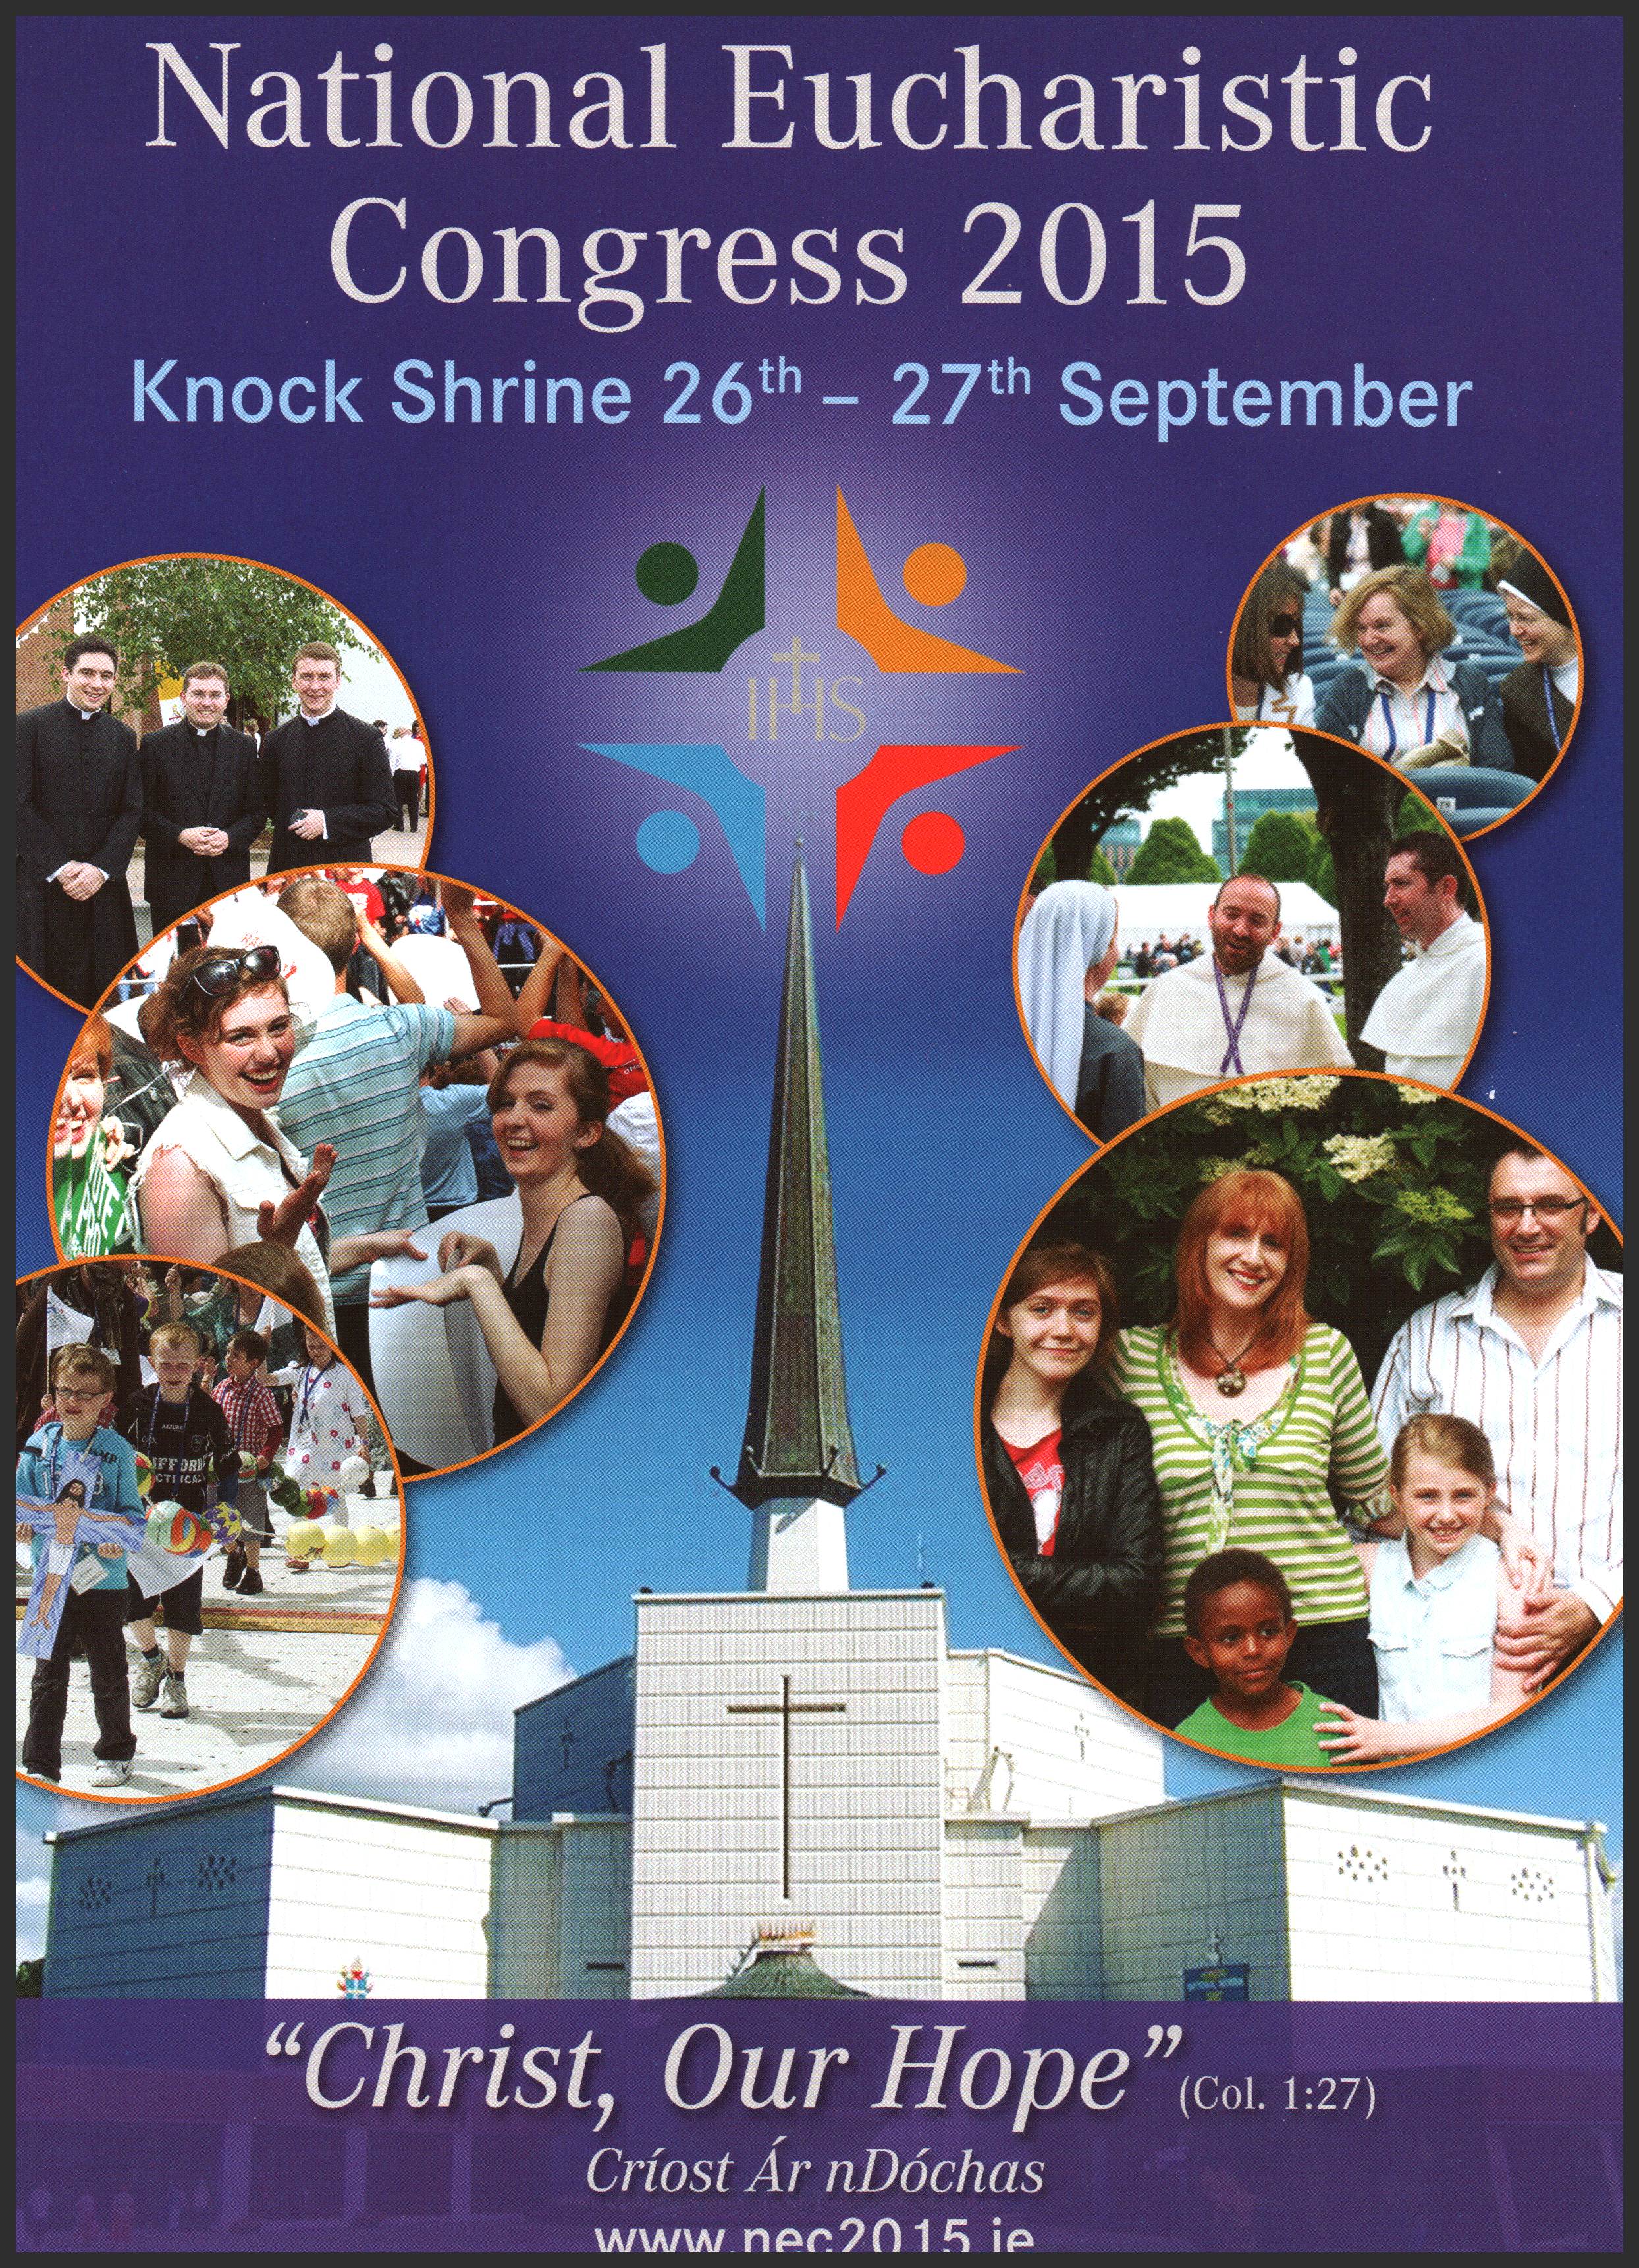 National Eucharistic Congress in Knock